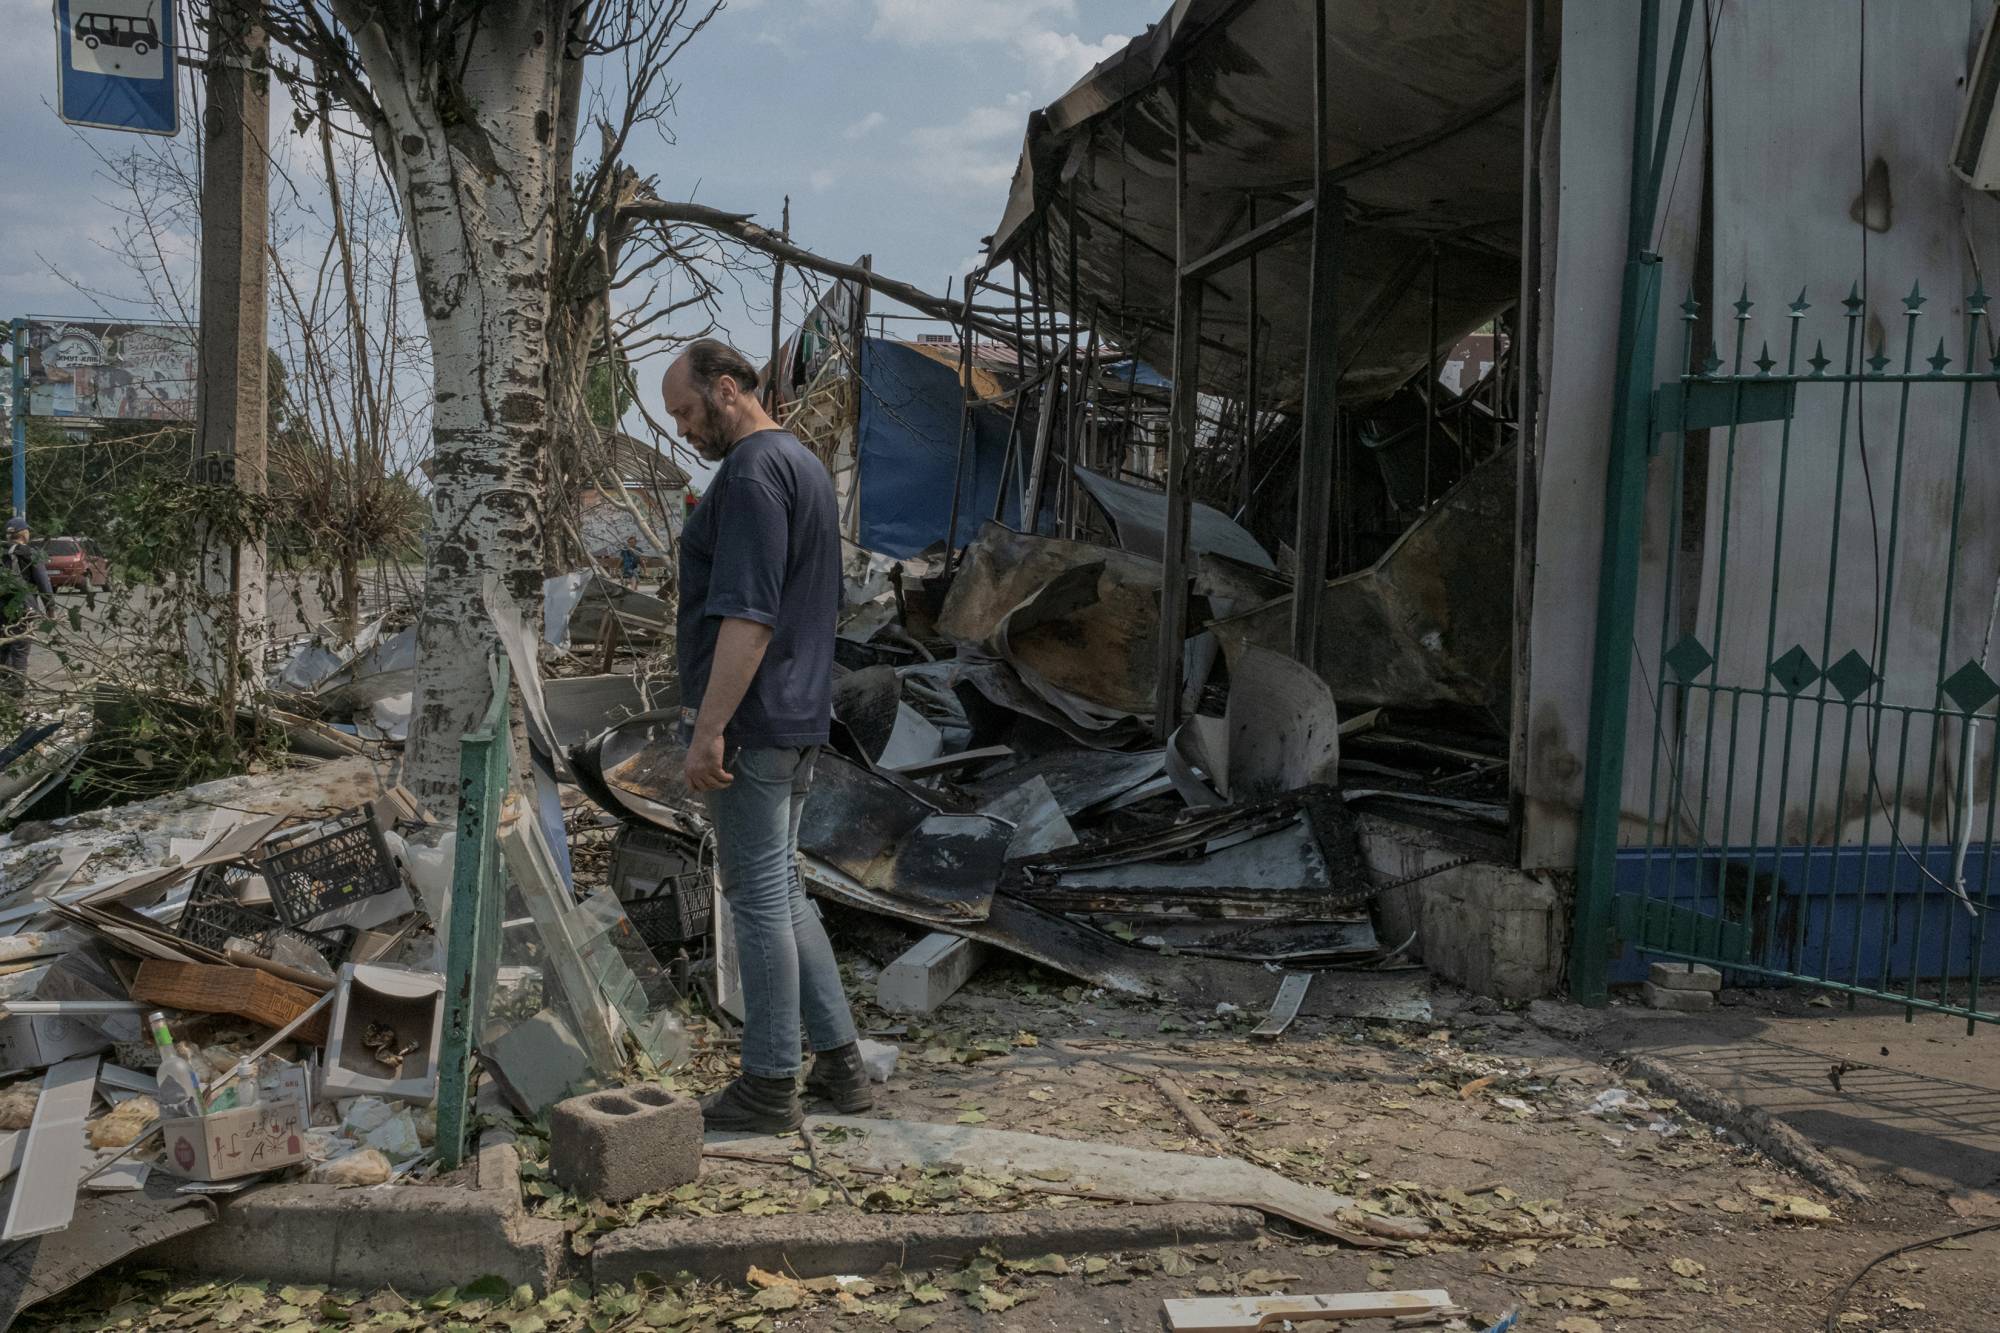 A resident walks by the entrance of a destroyed bazaar hit by shelling Saturday in Bakhmut, Ukraine, on Saturday, where Russian troops are trying to advance. Bakhmut has been battered by shelling this week, as Russia seeks to take the remaining Ukrainian-held areas of Donetsk province. | MAURICIO LIMA / THE NEW YORK TIMES